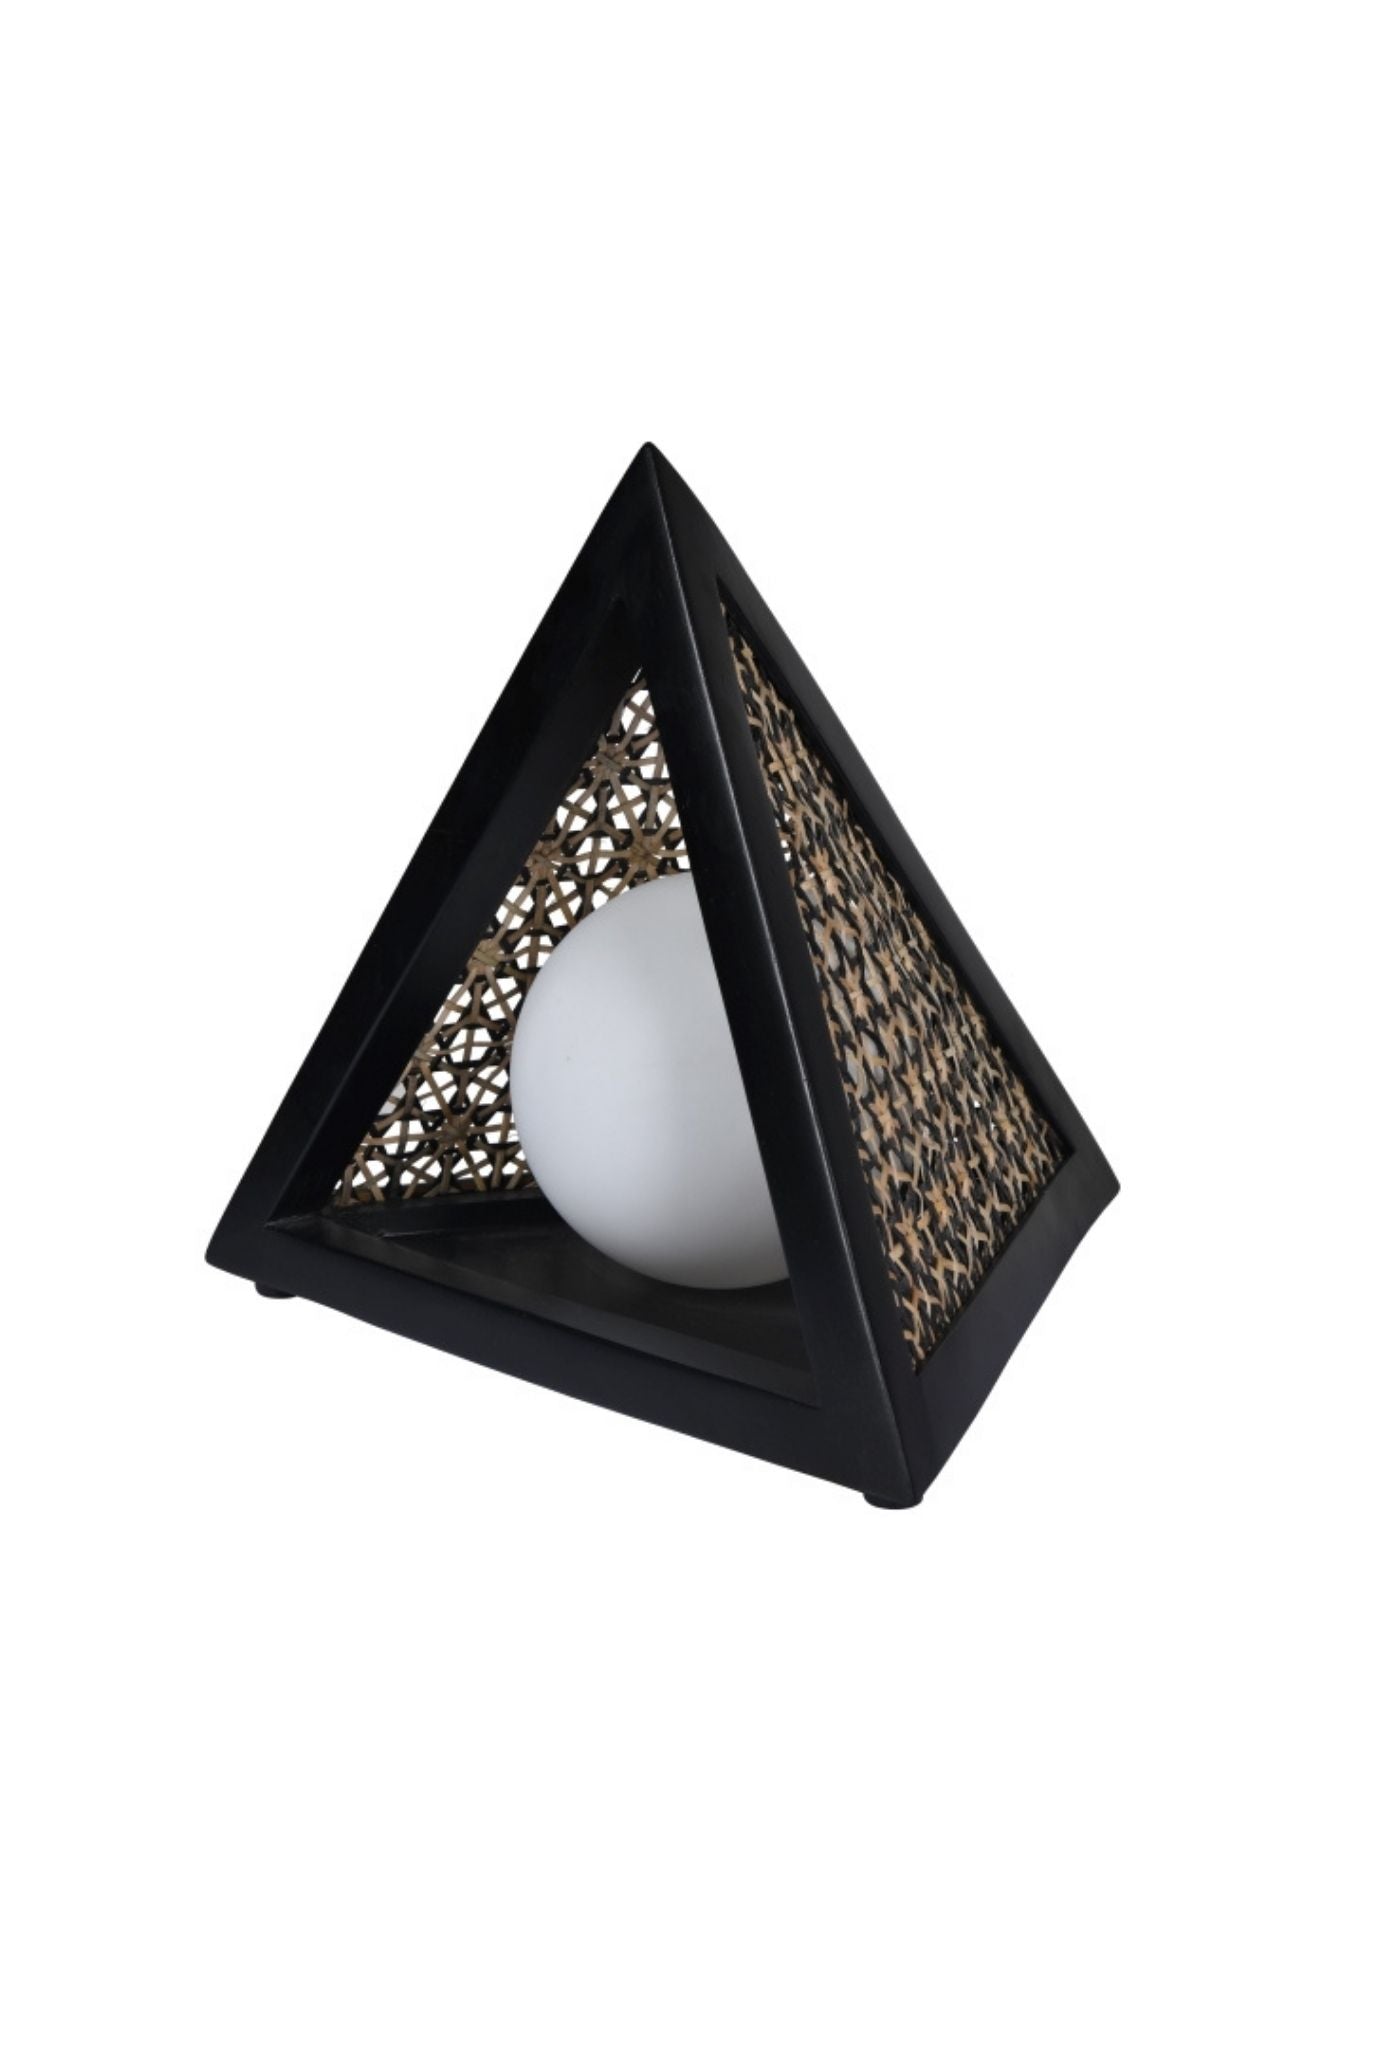 Twilight Prism Table Lamp (SHIPPING ONLY IN INDIA)